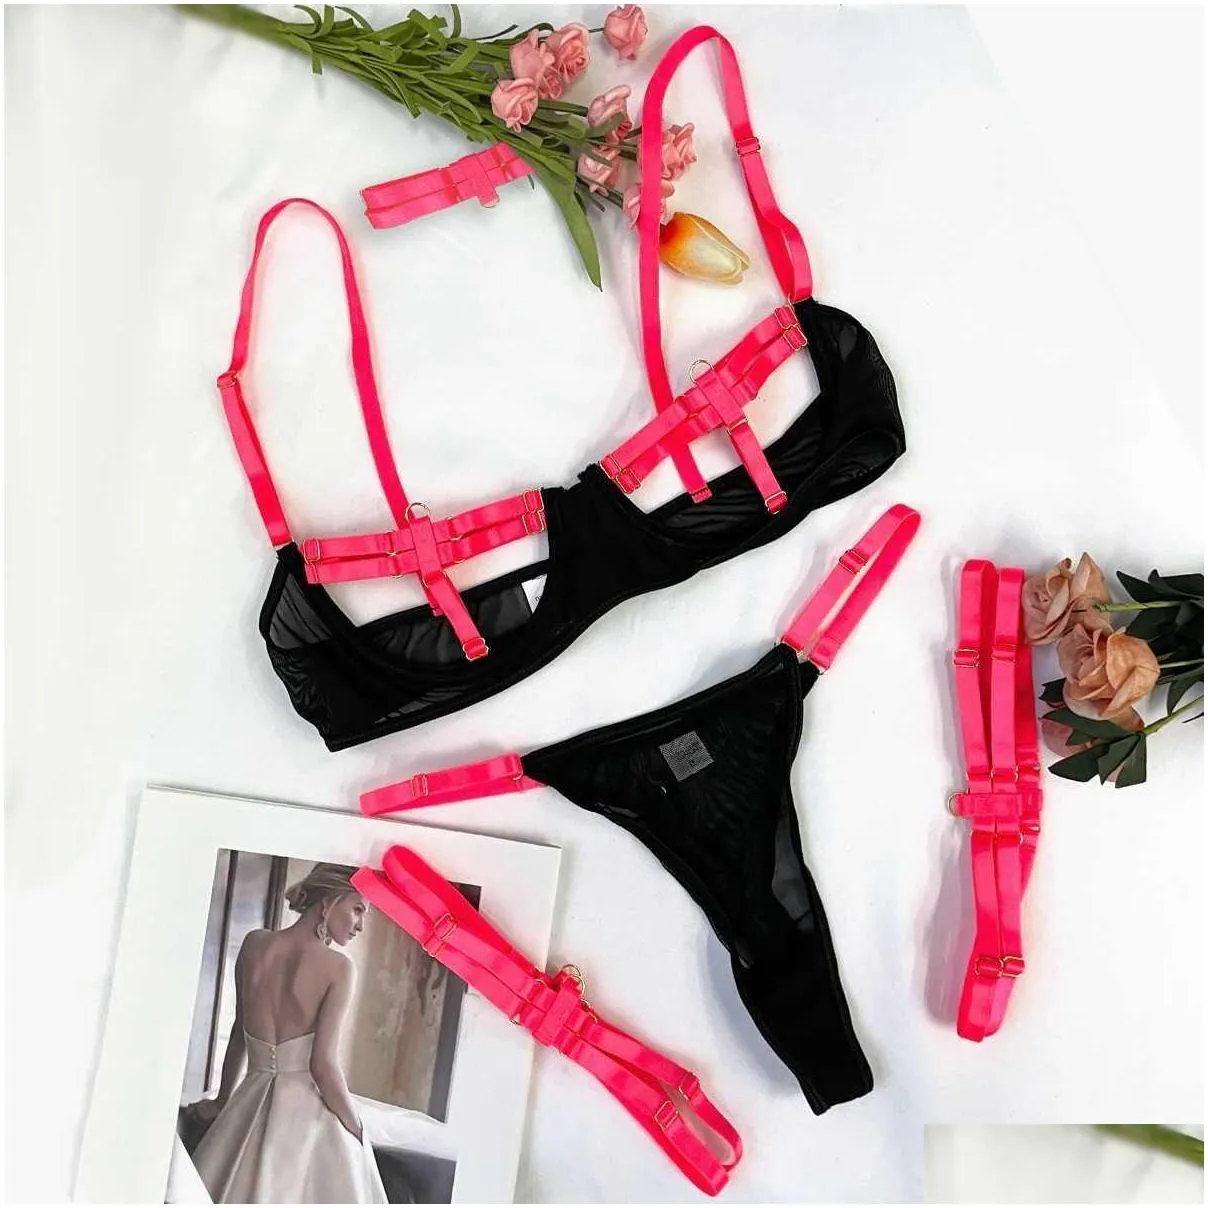 Other Home Textile Underwear Woman Sexi Open Cup Thongs Sensual Sexy Women  Whore Costume Briefs Intimate Gstring Lingerie Corset Tra Dhuoa From  Nerdsropebags500mg, $17.29